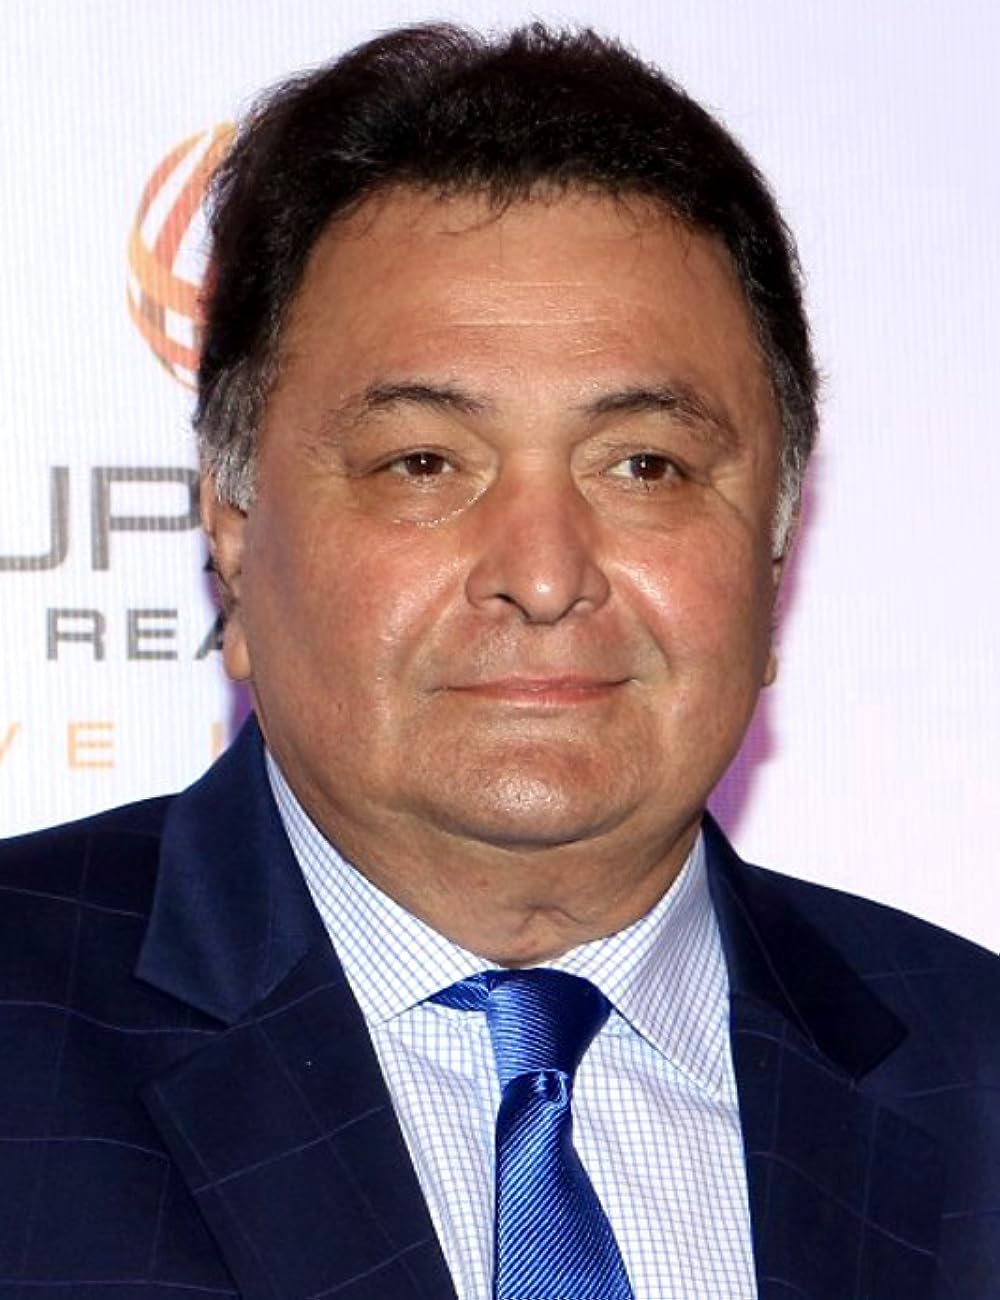 Son of Raj Kapoor, Rishi Kapoor, was the most successful of Raj Kapoor's children, starred in iconic films like 